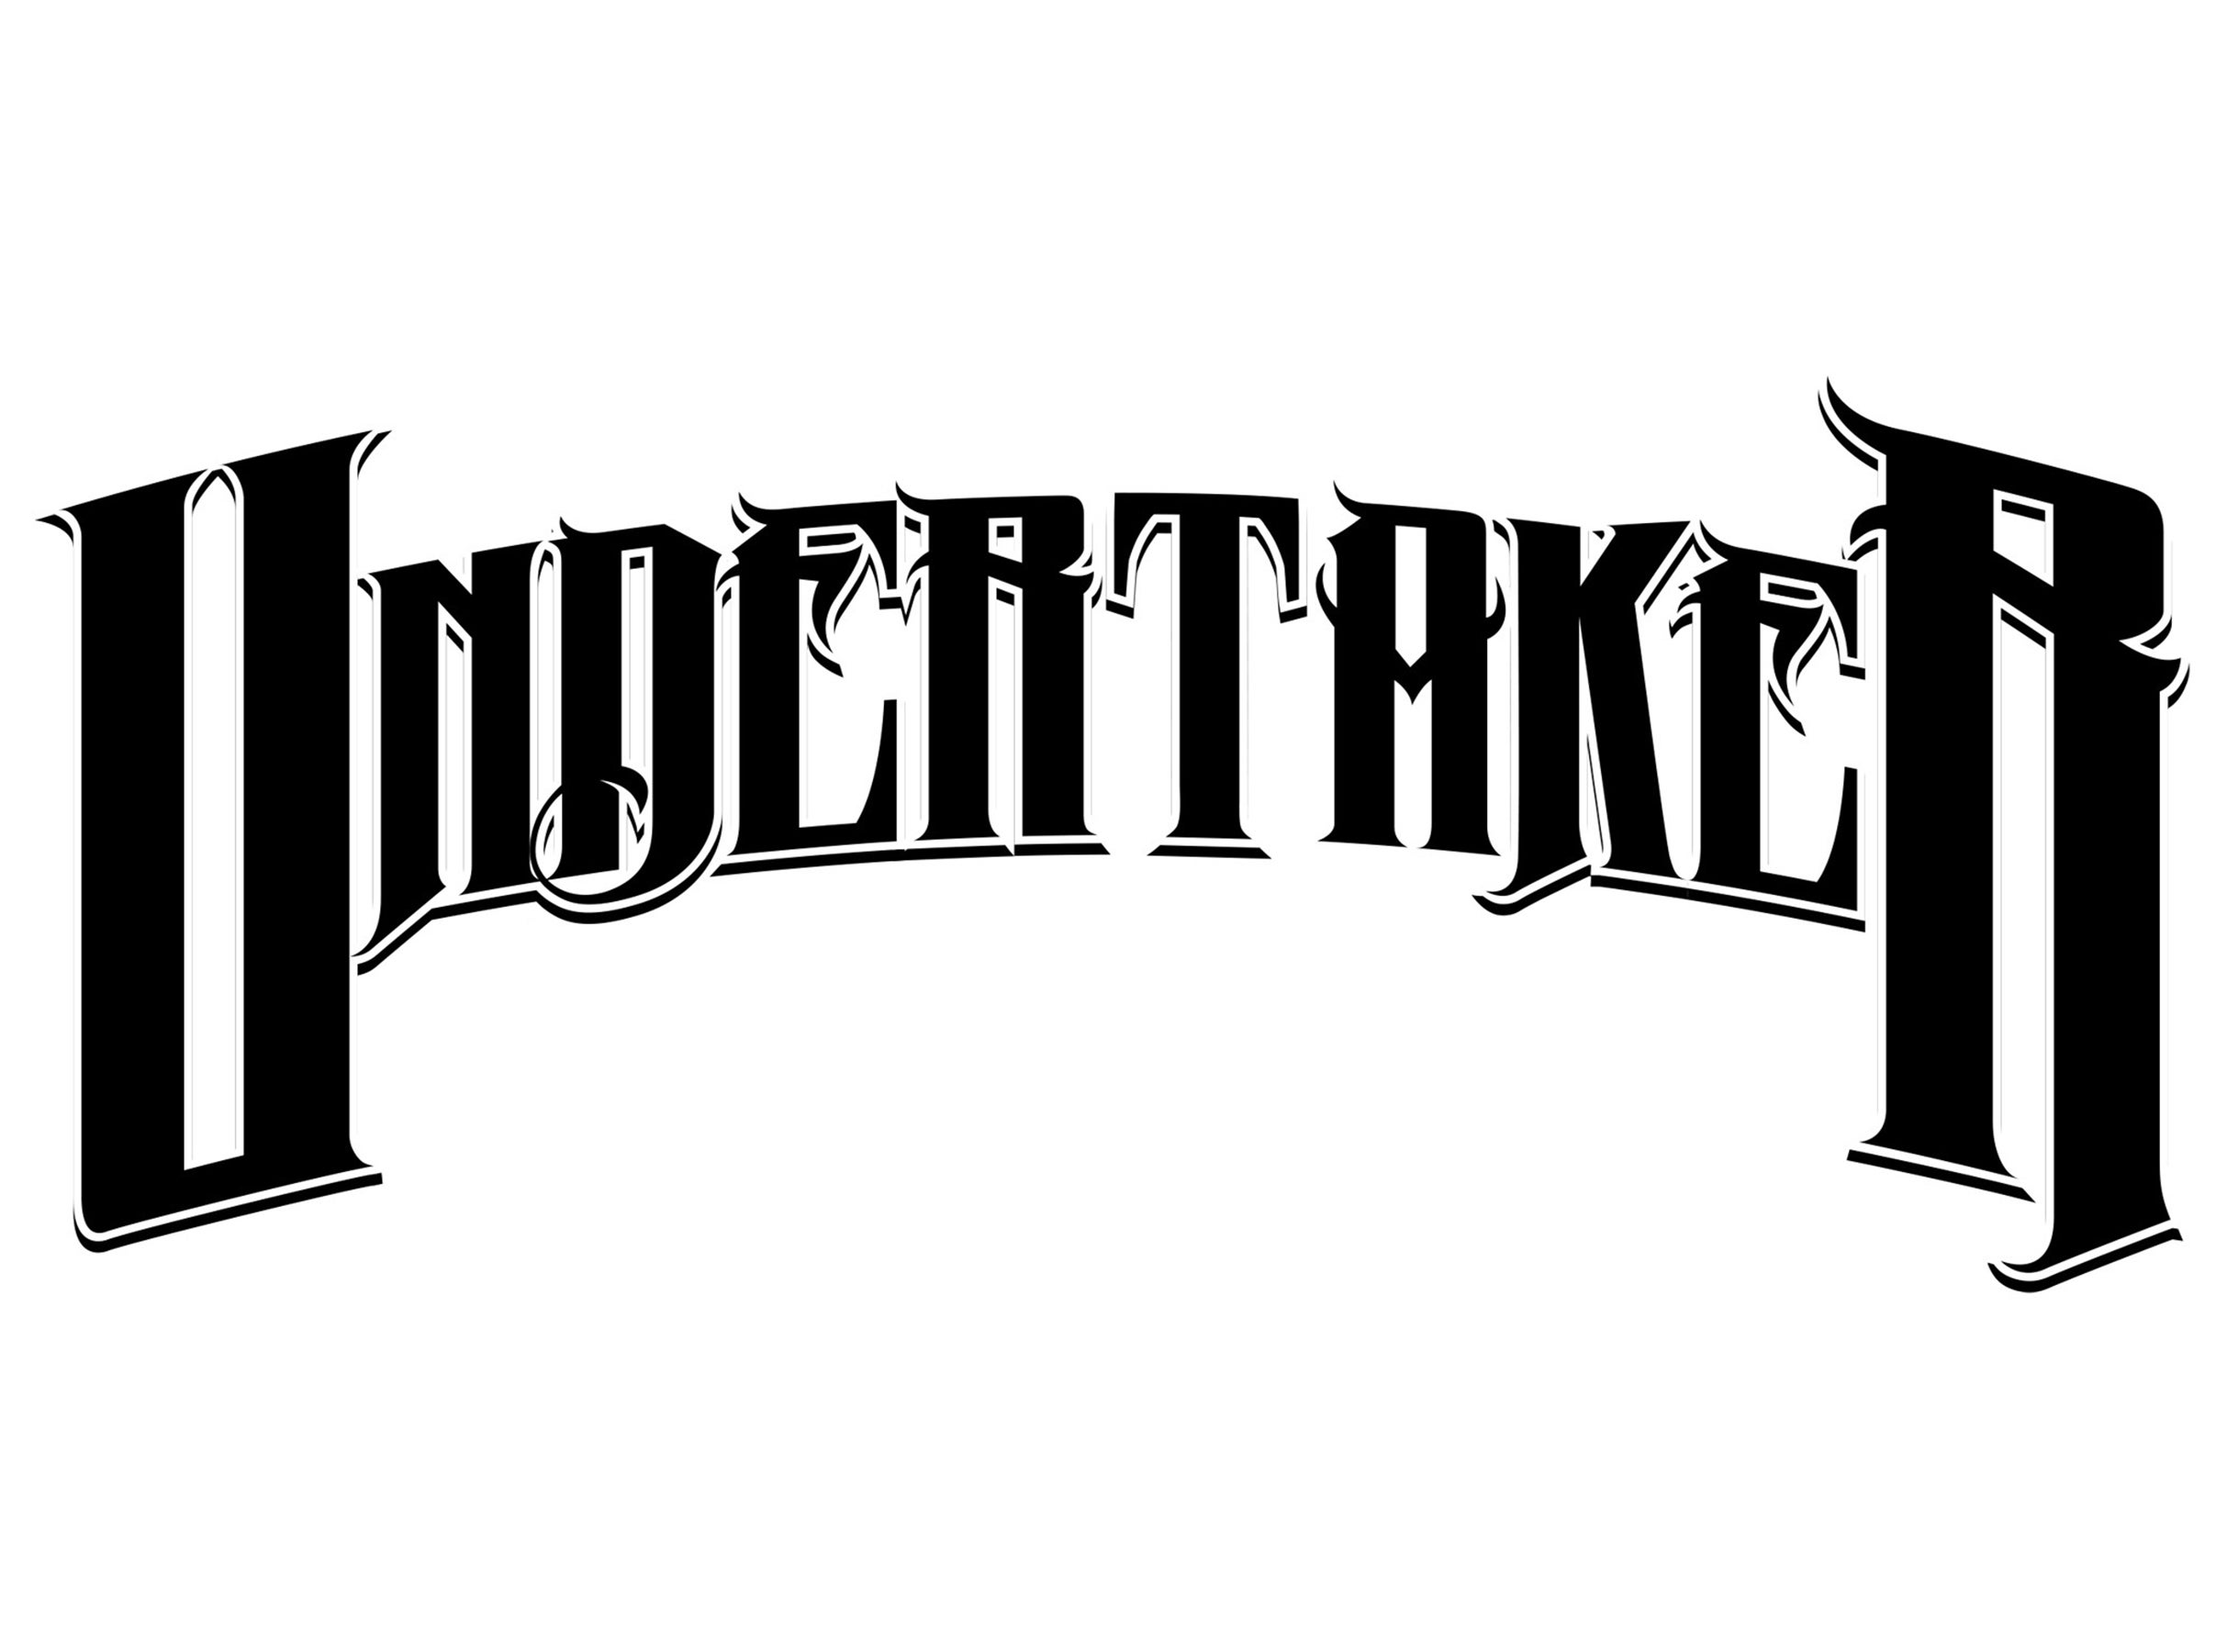 Undertaker 1 deadMAN SHOW presale password for wrestling show tickets in Brisbane, QLD (The Fortitude Music Hall)